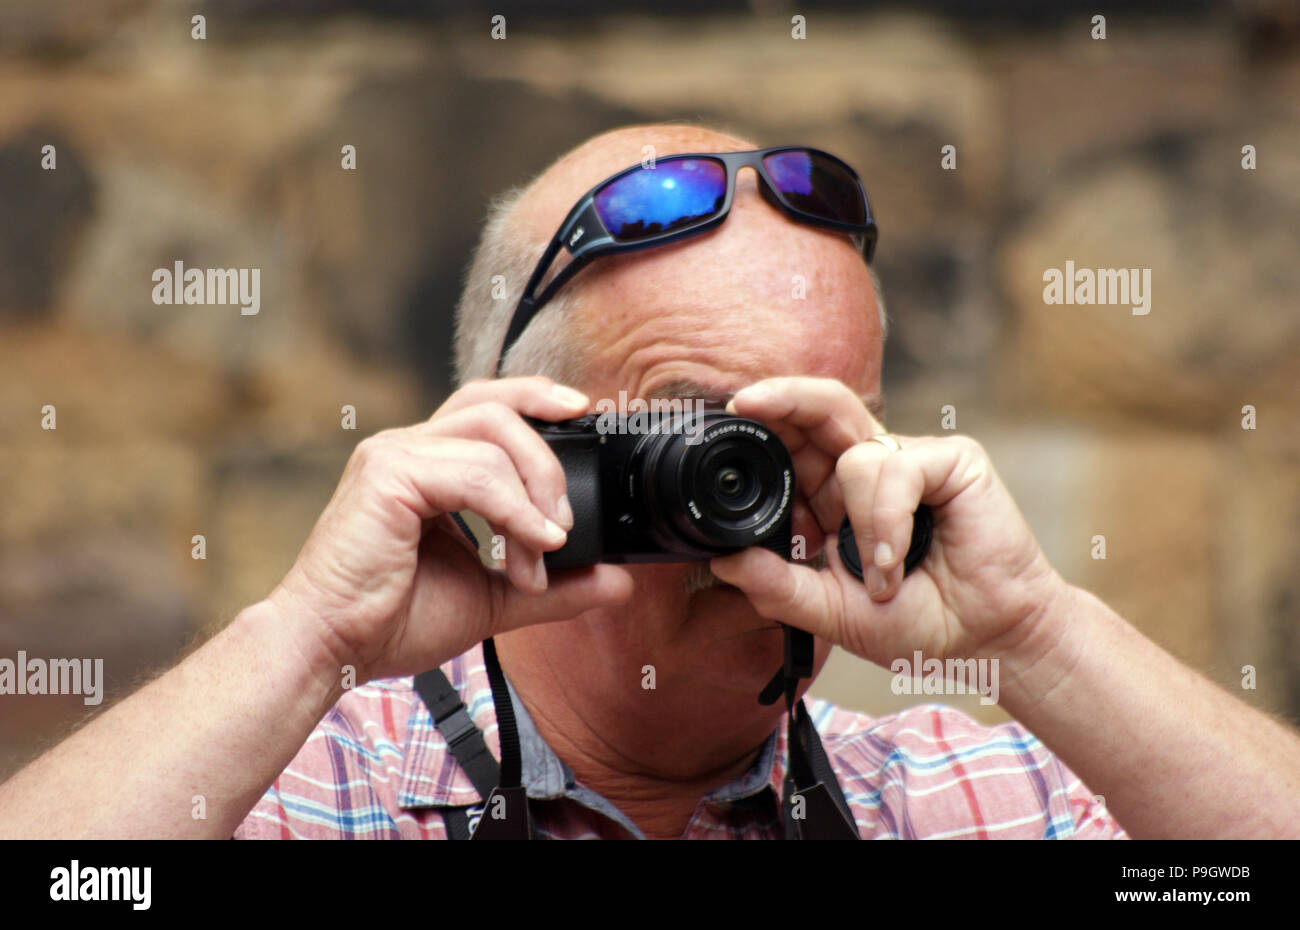 Man wearing sunglasses on his head taking a photograph Stock Photo